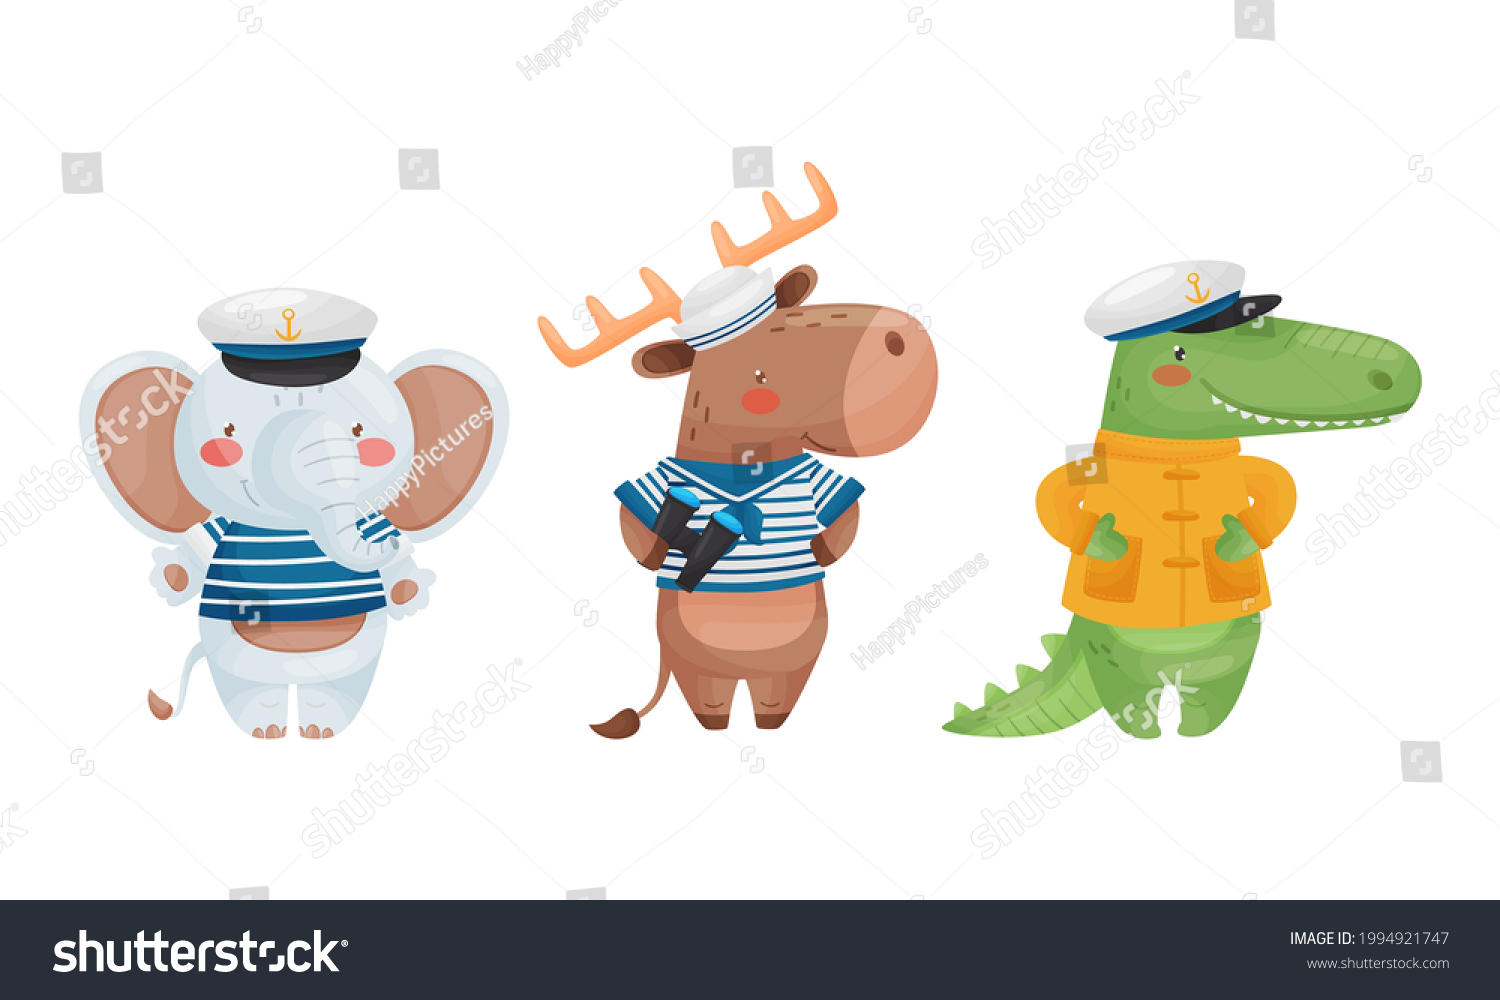 SVG of Cute Animal Sailor Character Wearing Striped Vest and Peakless Hat Vector Set svg